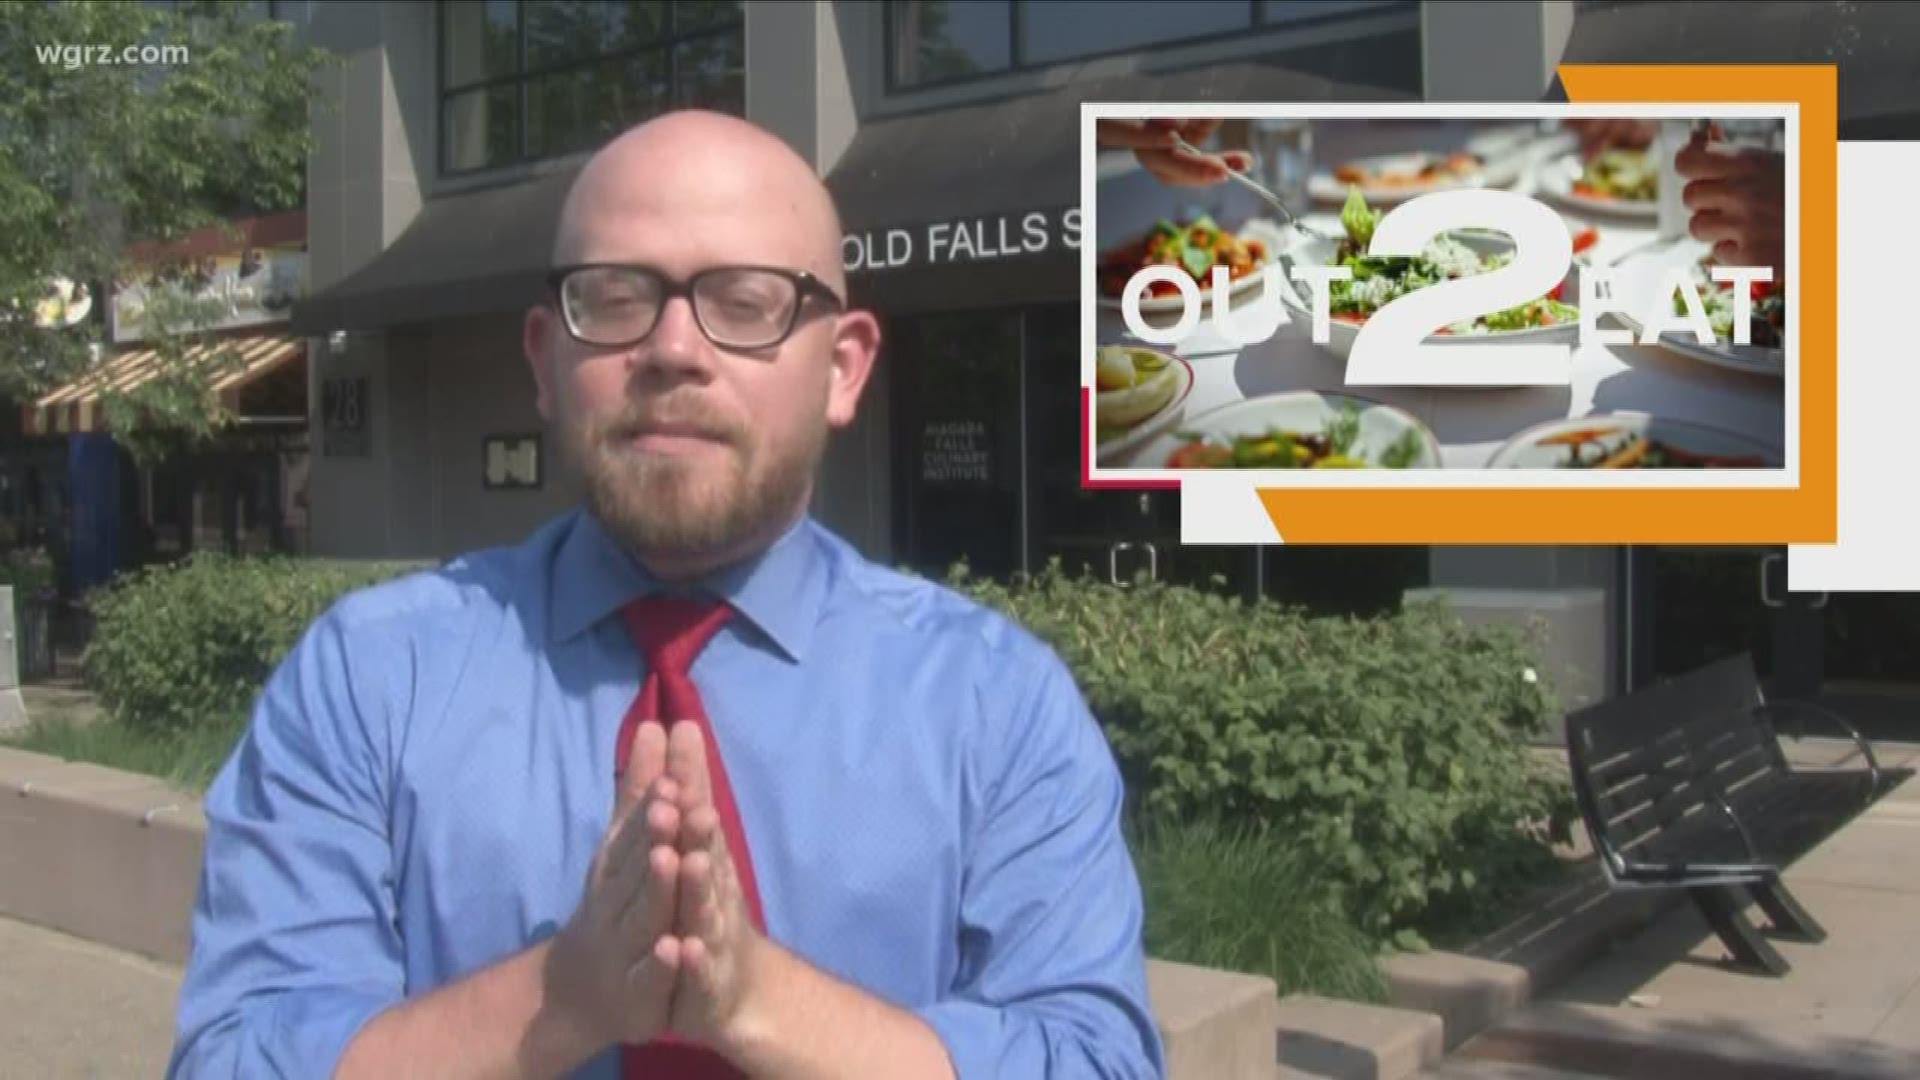 This week in Out 2 Eat, reporter and former chef Joshua Robinson hits up Niagara Falls for some of its hidden gems and rare food finds.